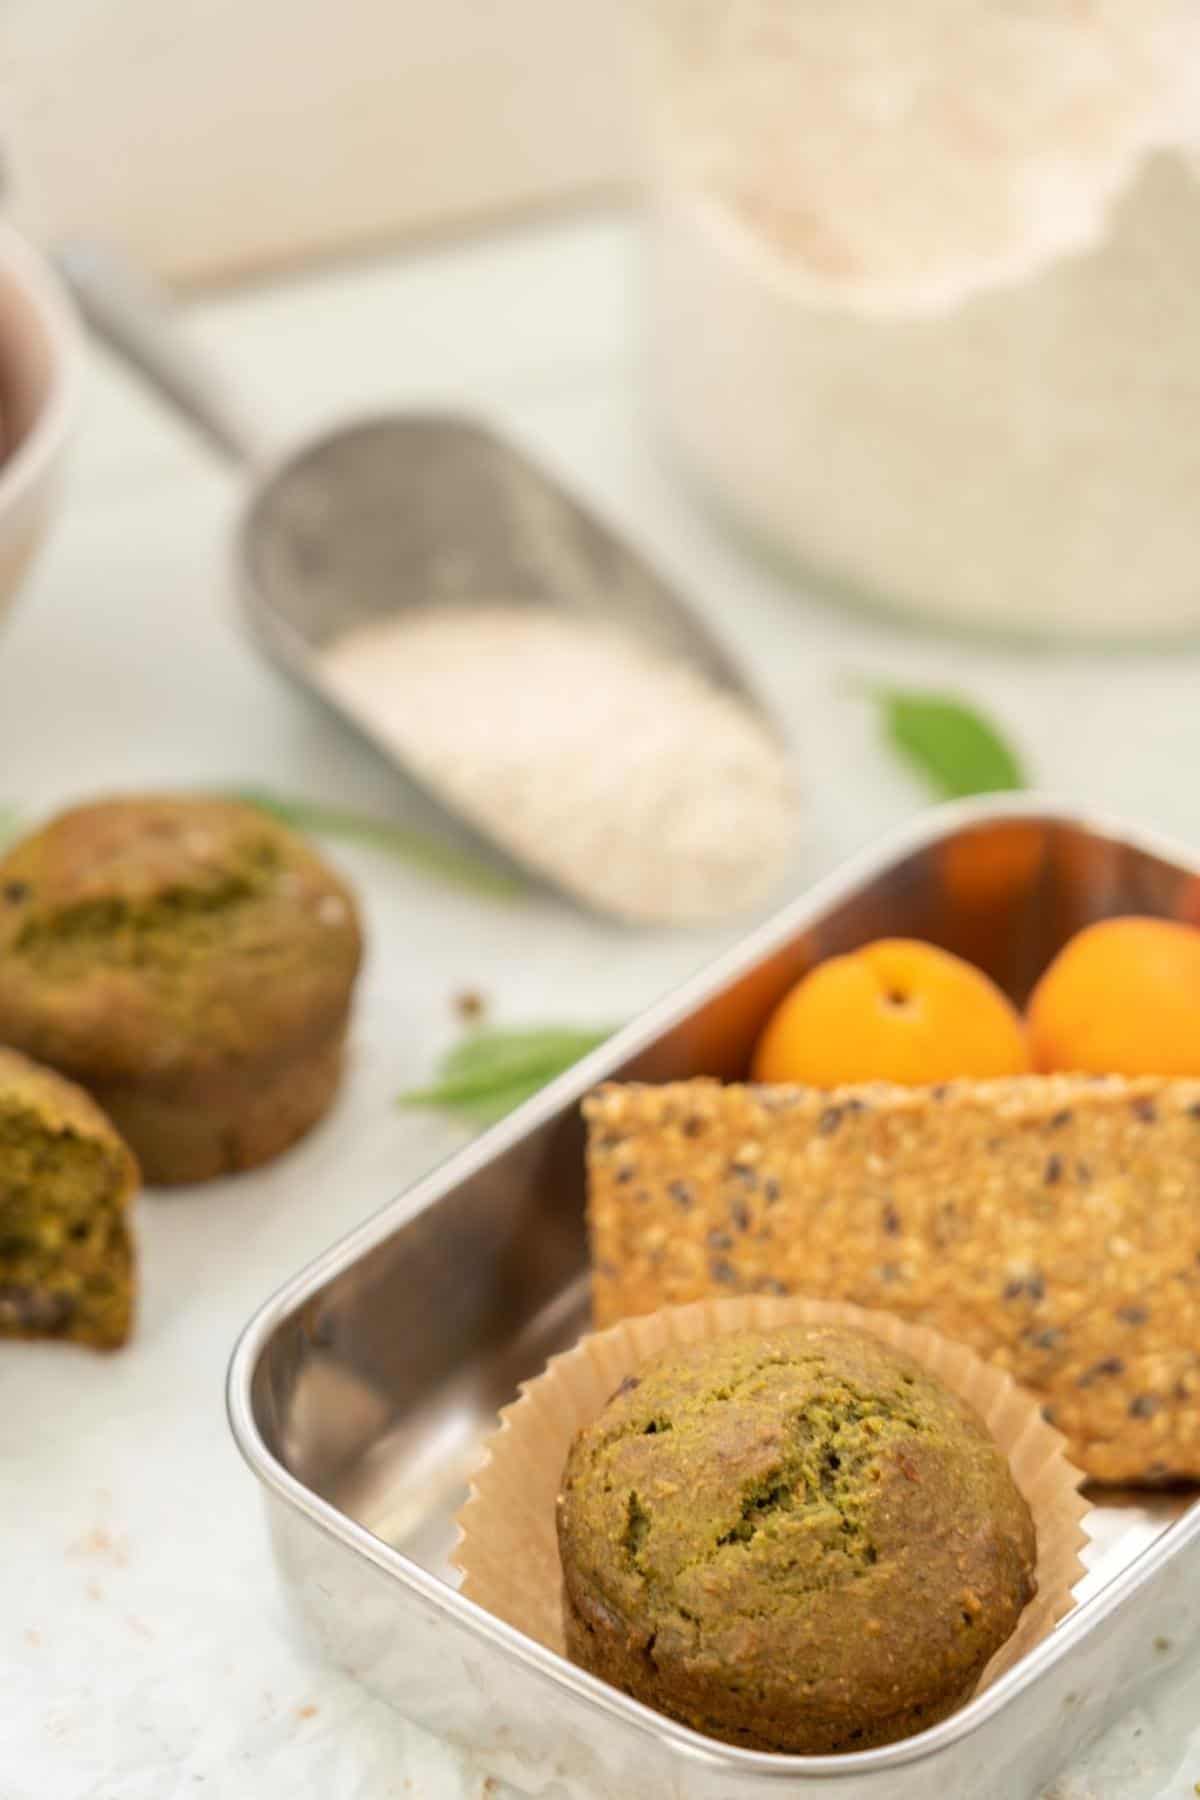 A lunchbox packed with a green muffin, cracker bread and apricots.